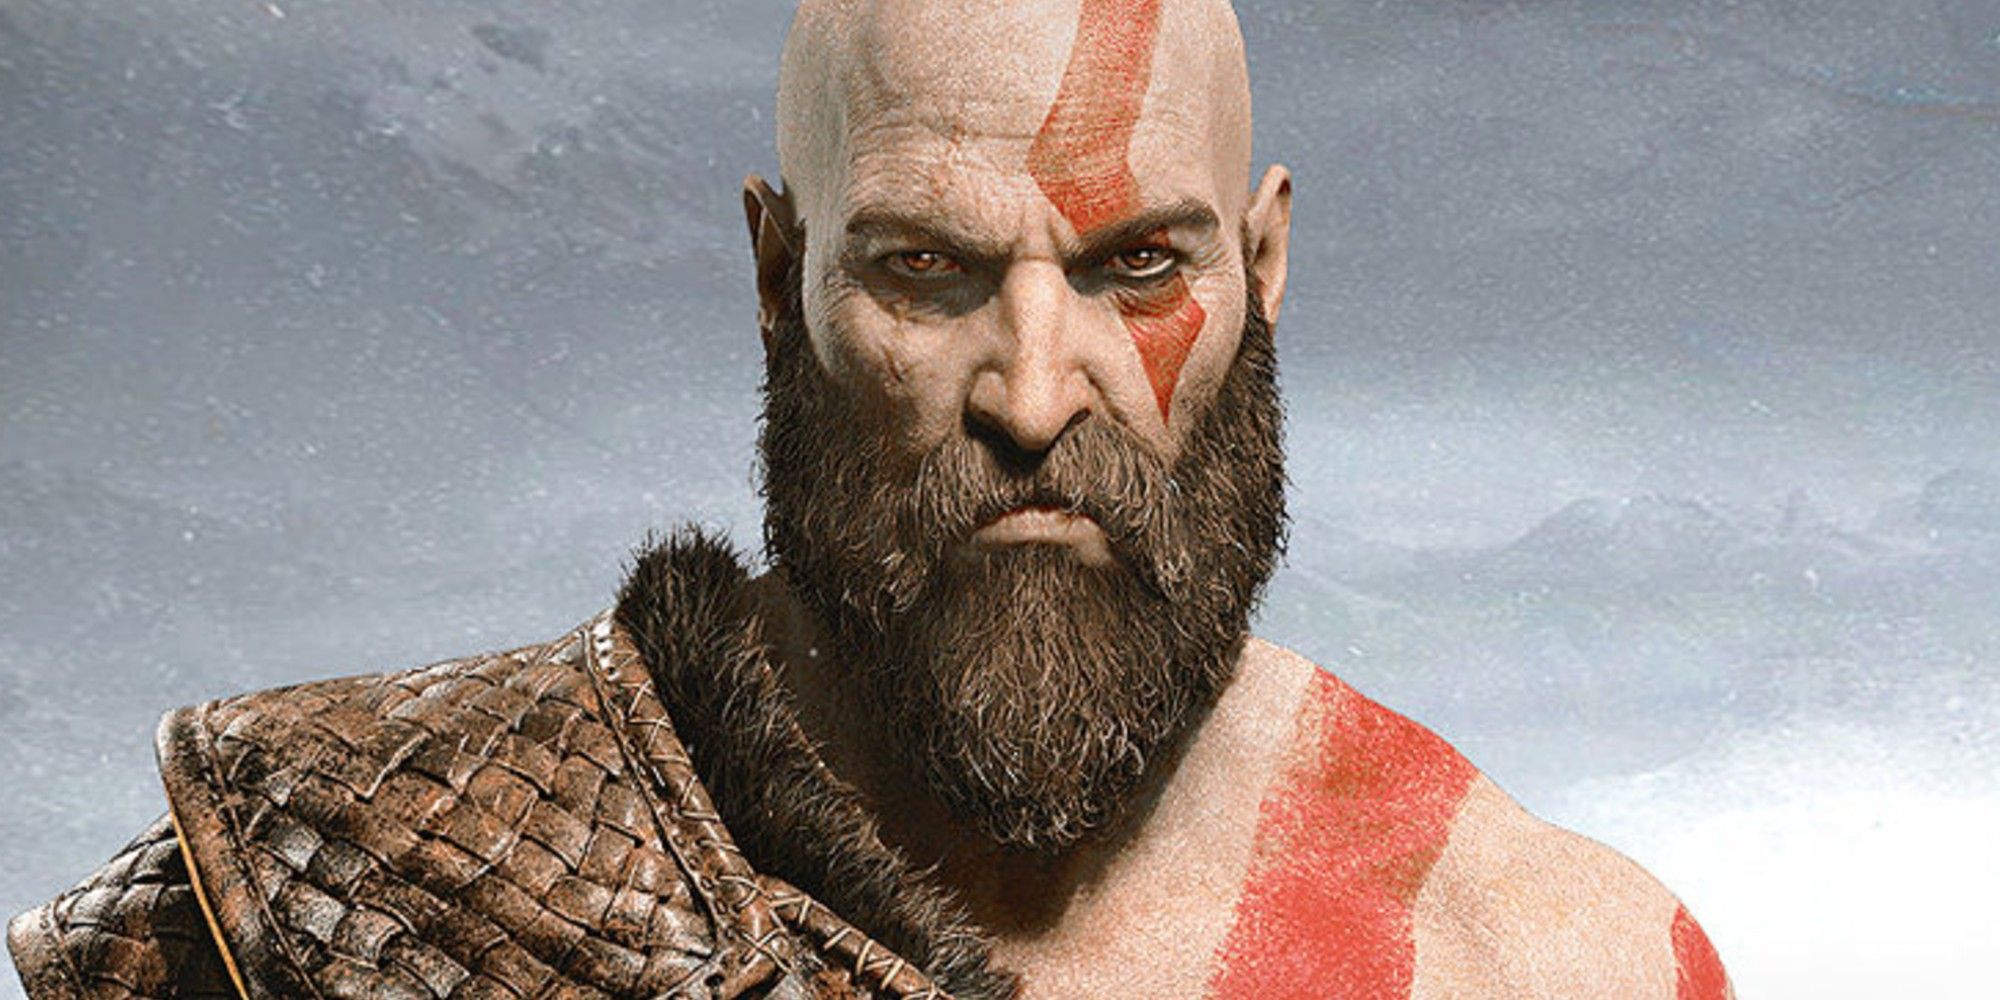 real ages of video game characters - Kratos